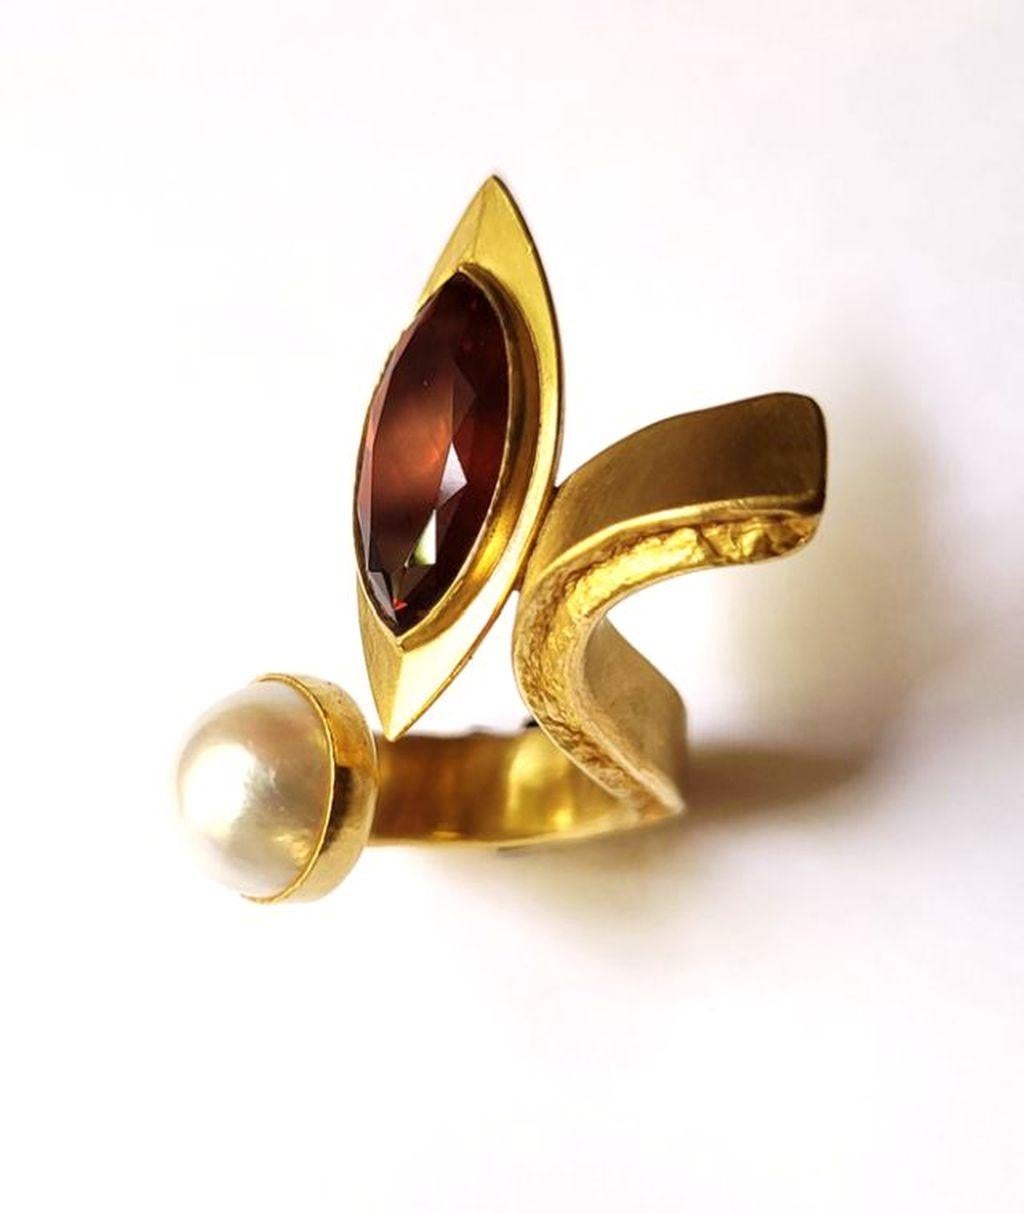 Magnificent ring made of 24 carat gold by Marc Wilpert. The unique design makes this ring a statement piece. The sparkling navette cut Madeira citrine next to the shiny mabée pearl with very good luster will complement any outfit.
Beautiful and